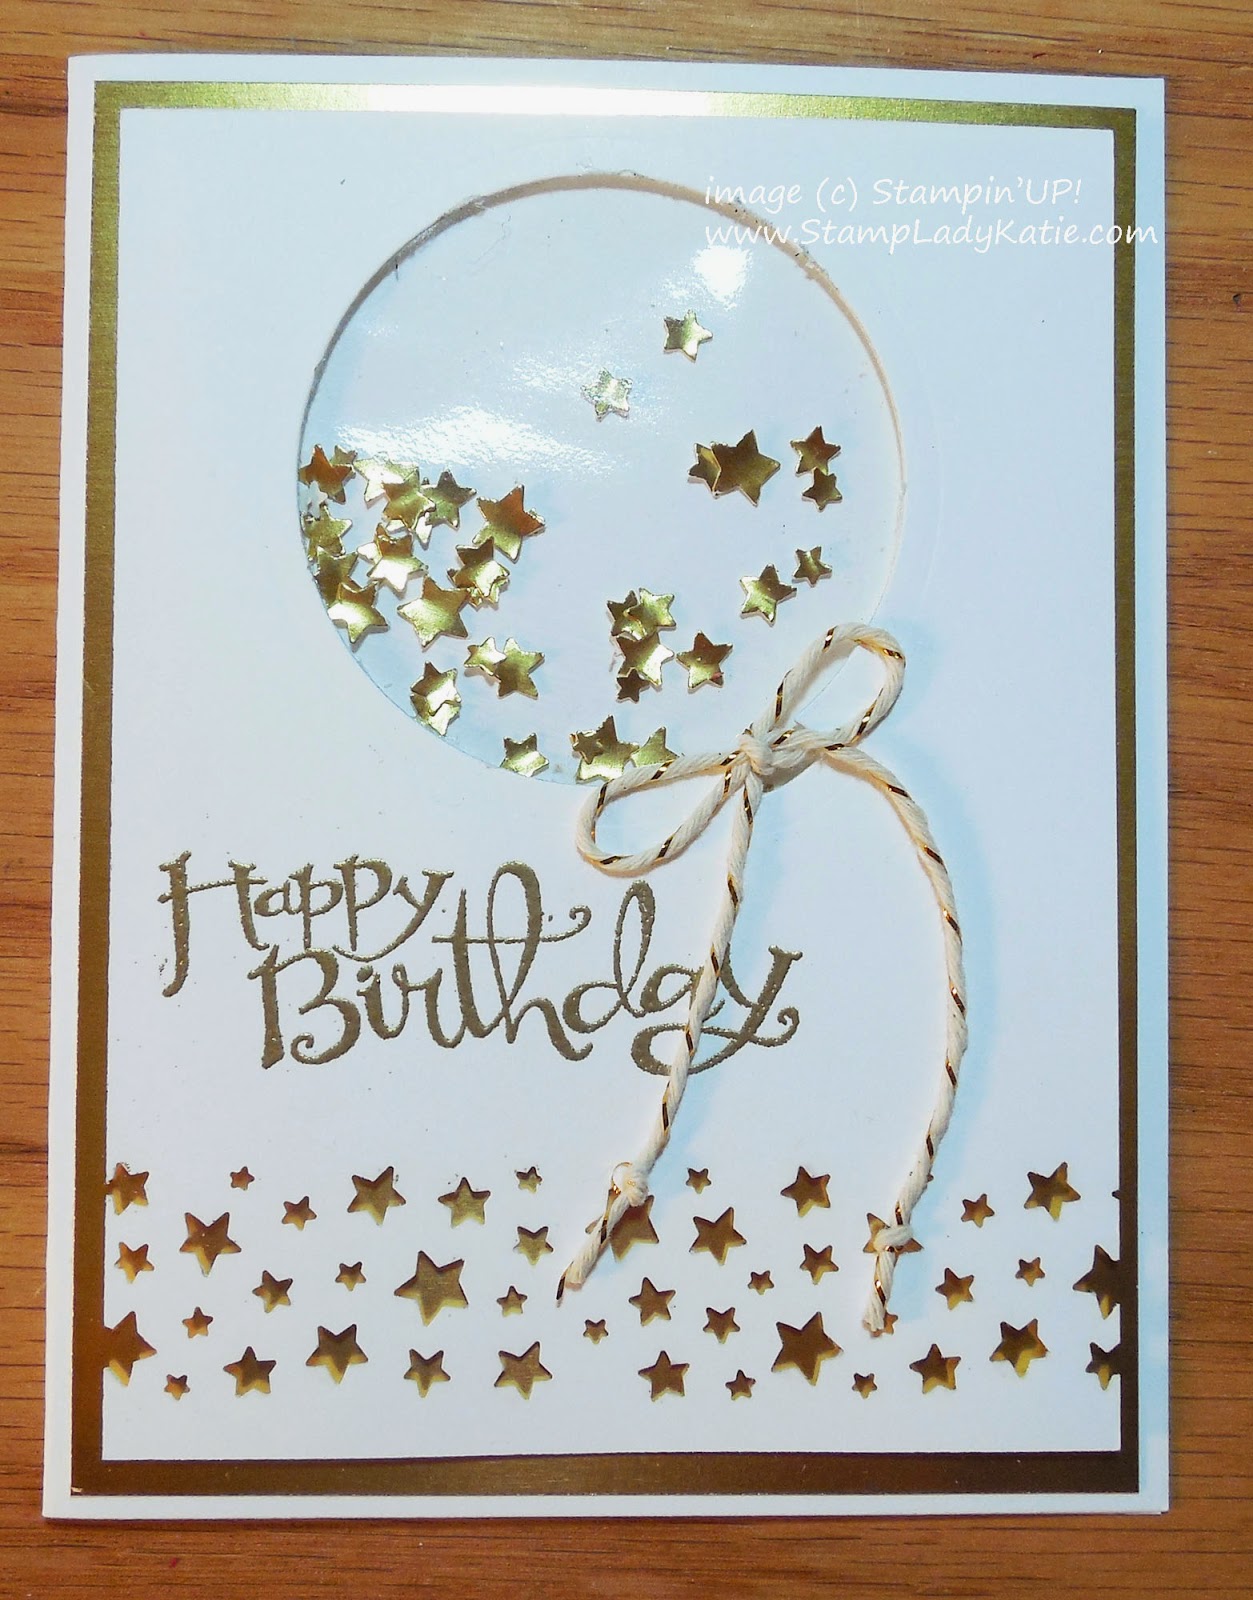 Shaker Card made with Stampin'UP!'s Confetti Stars Border Punch